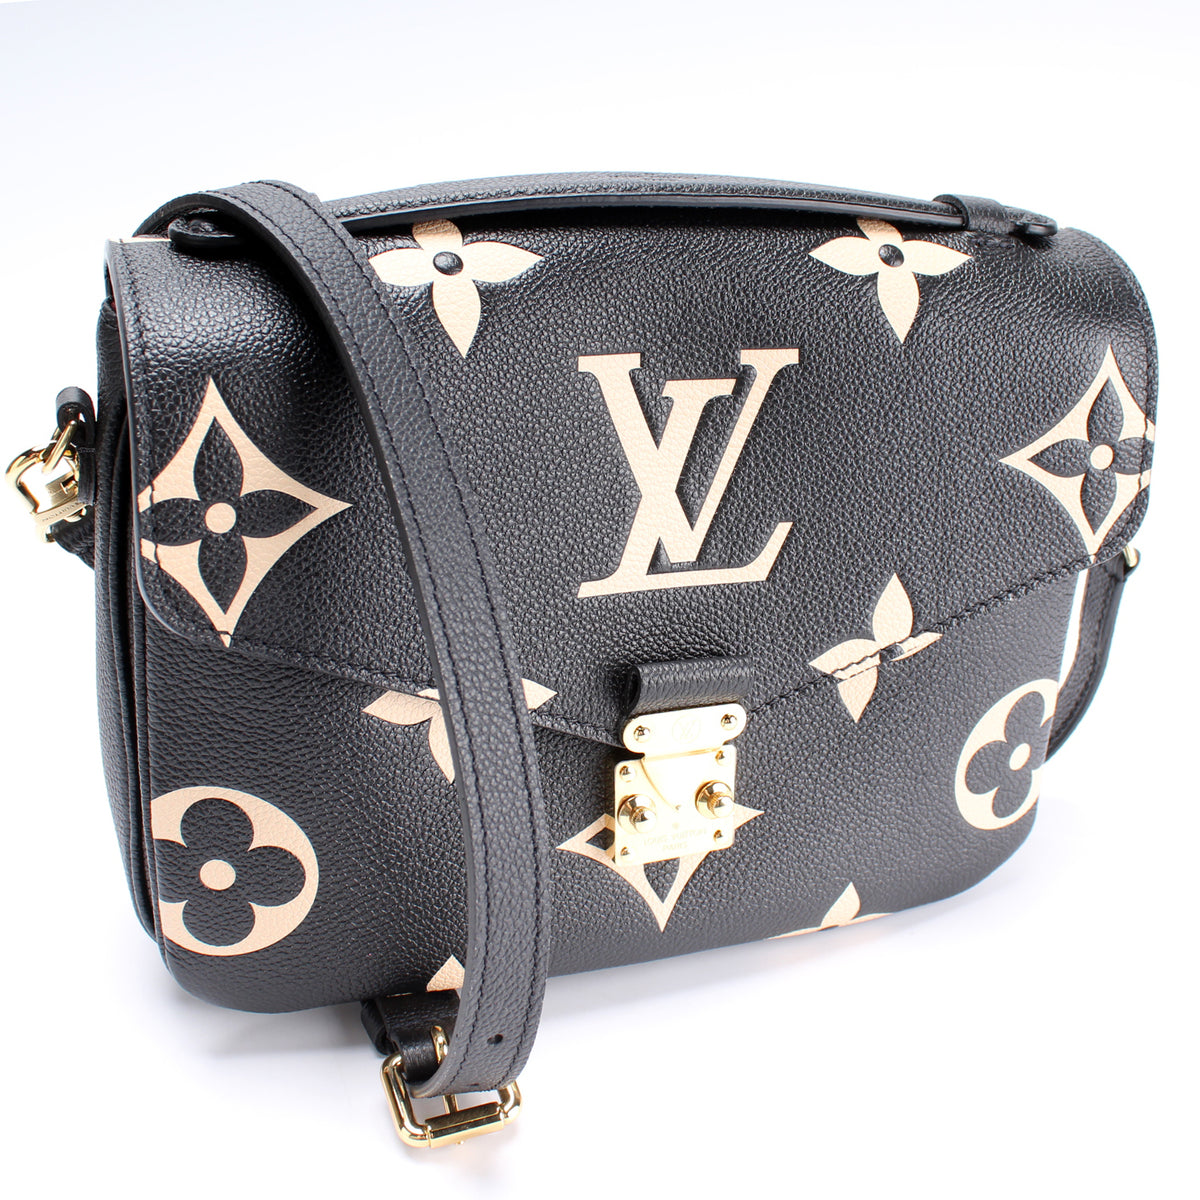 LOUIS VUITTON POCHETTE METIS 3 YR REVIEW including wear and tear, what fits  inside & more